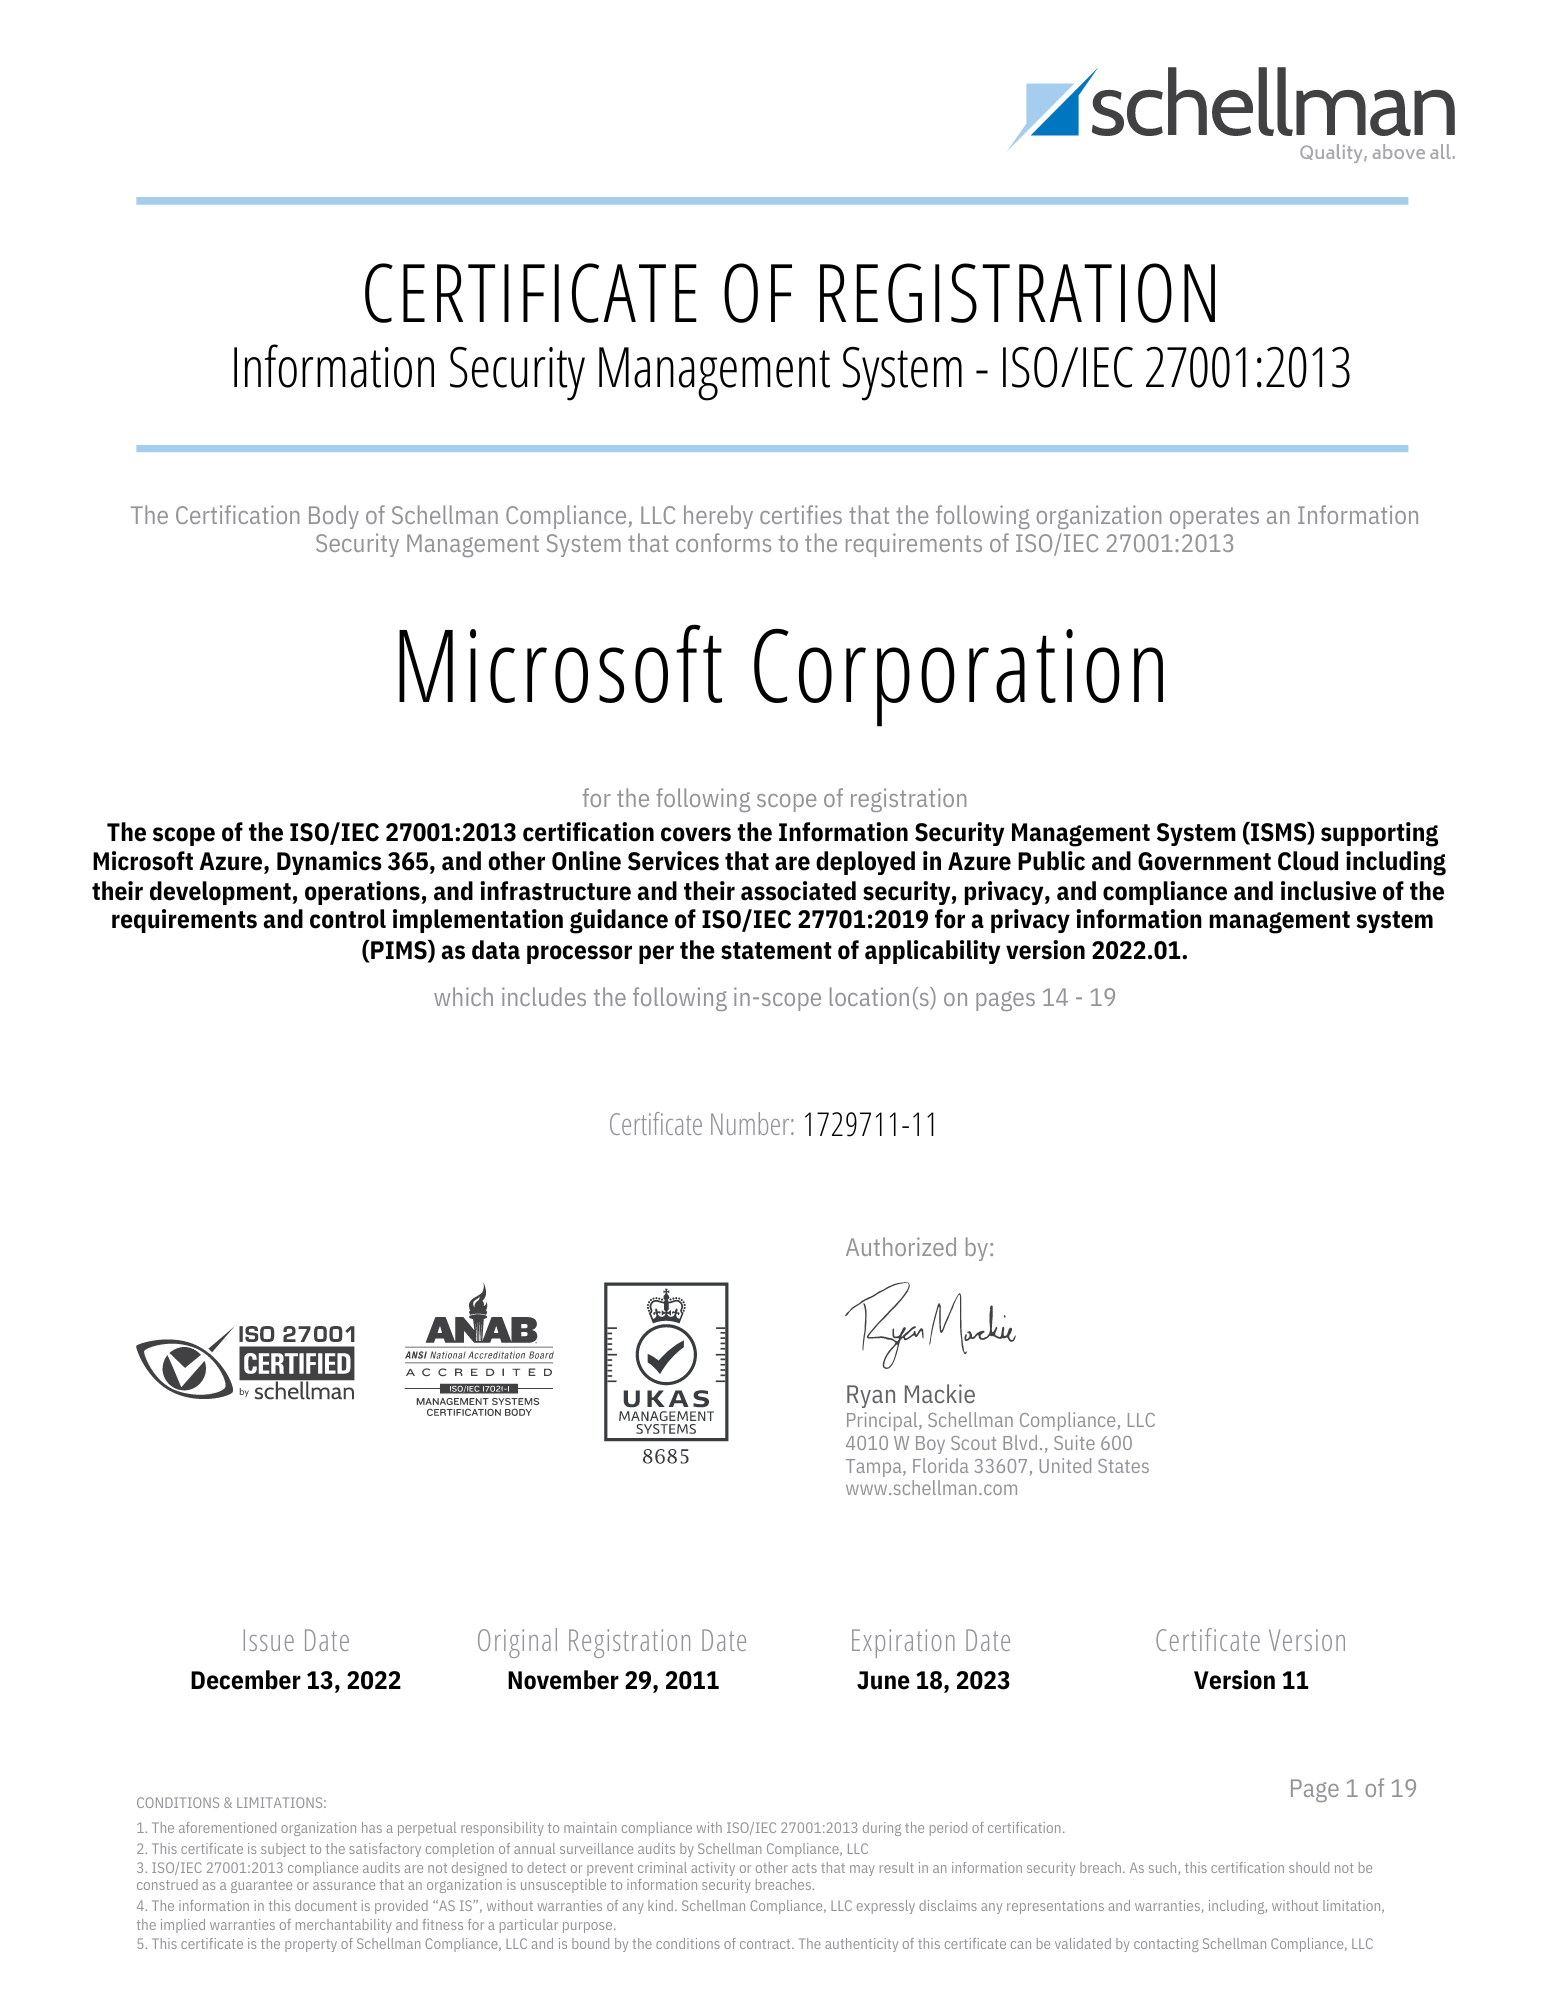 Microsoft Azure, Dynamics and Online Services - ISO 27001 and ISO27701 Certificate (12.13.2022).pdf